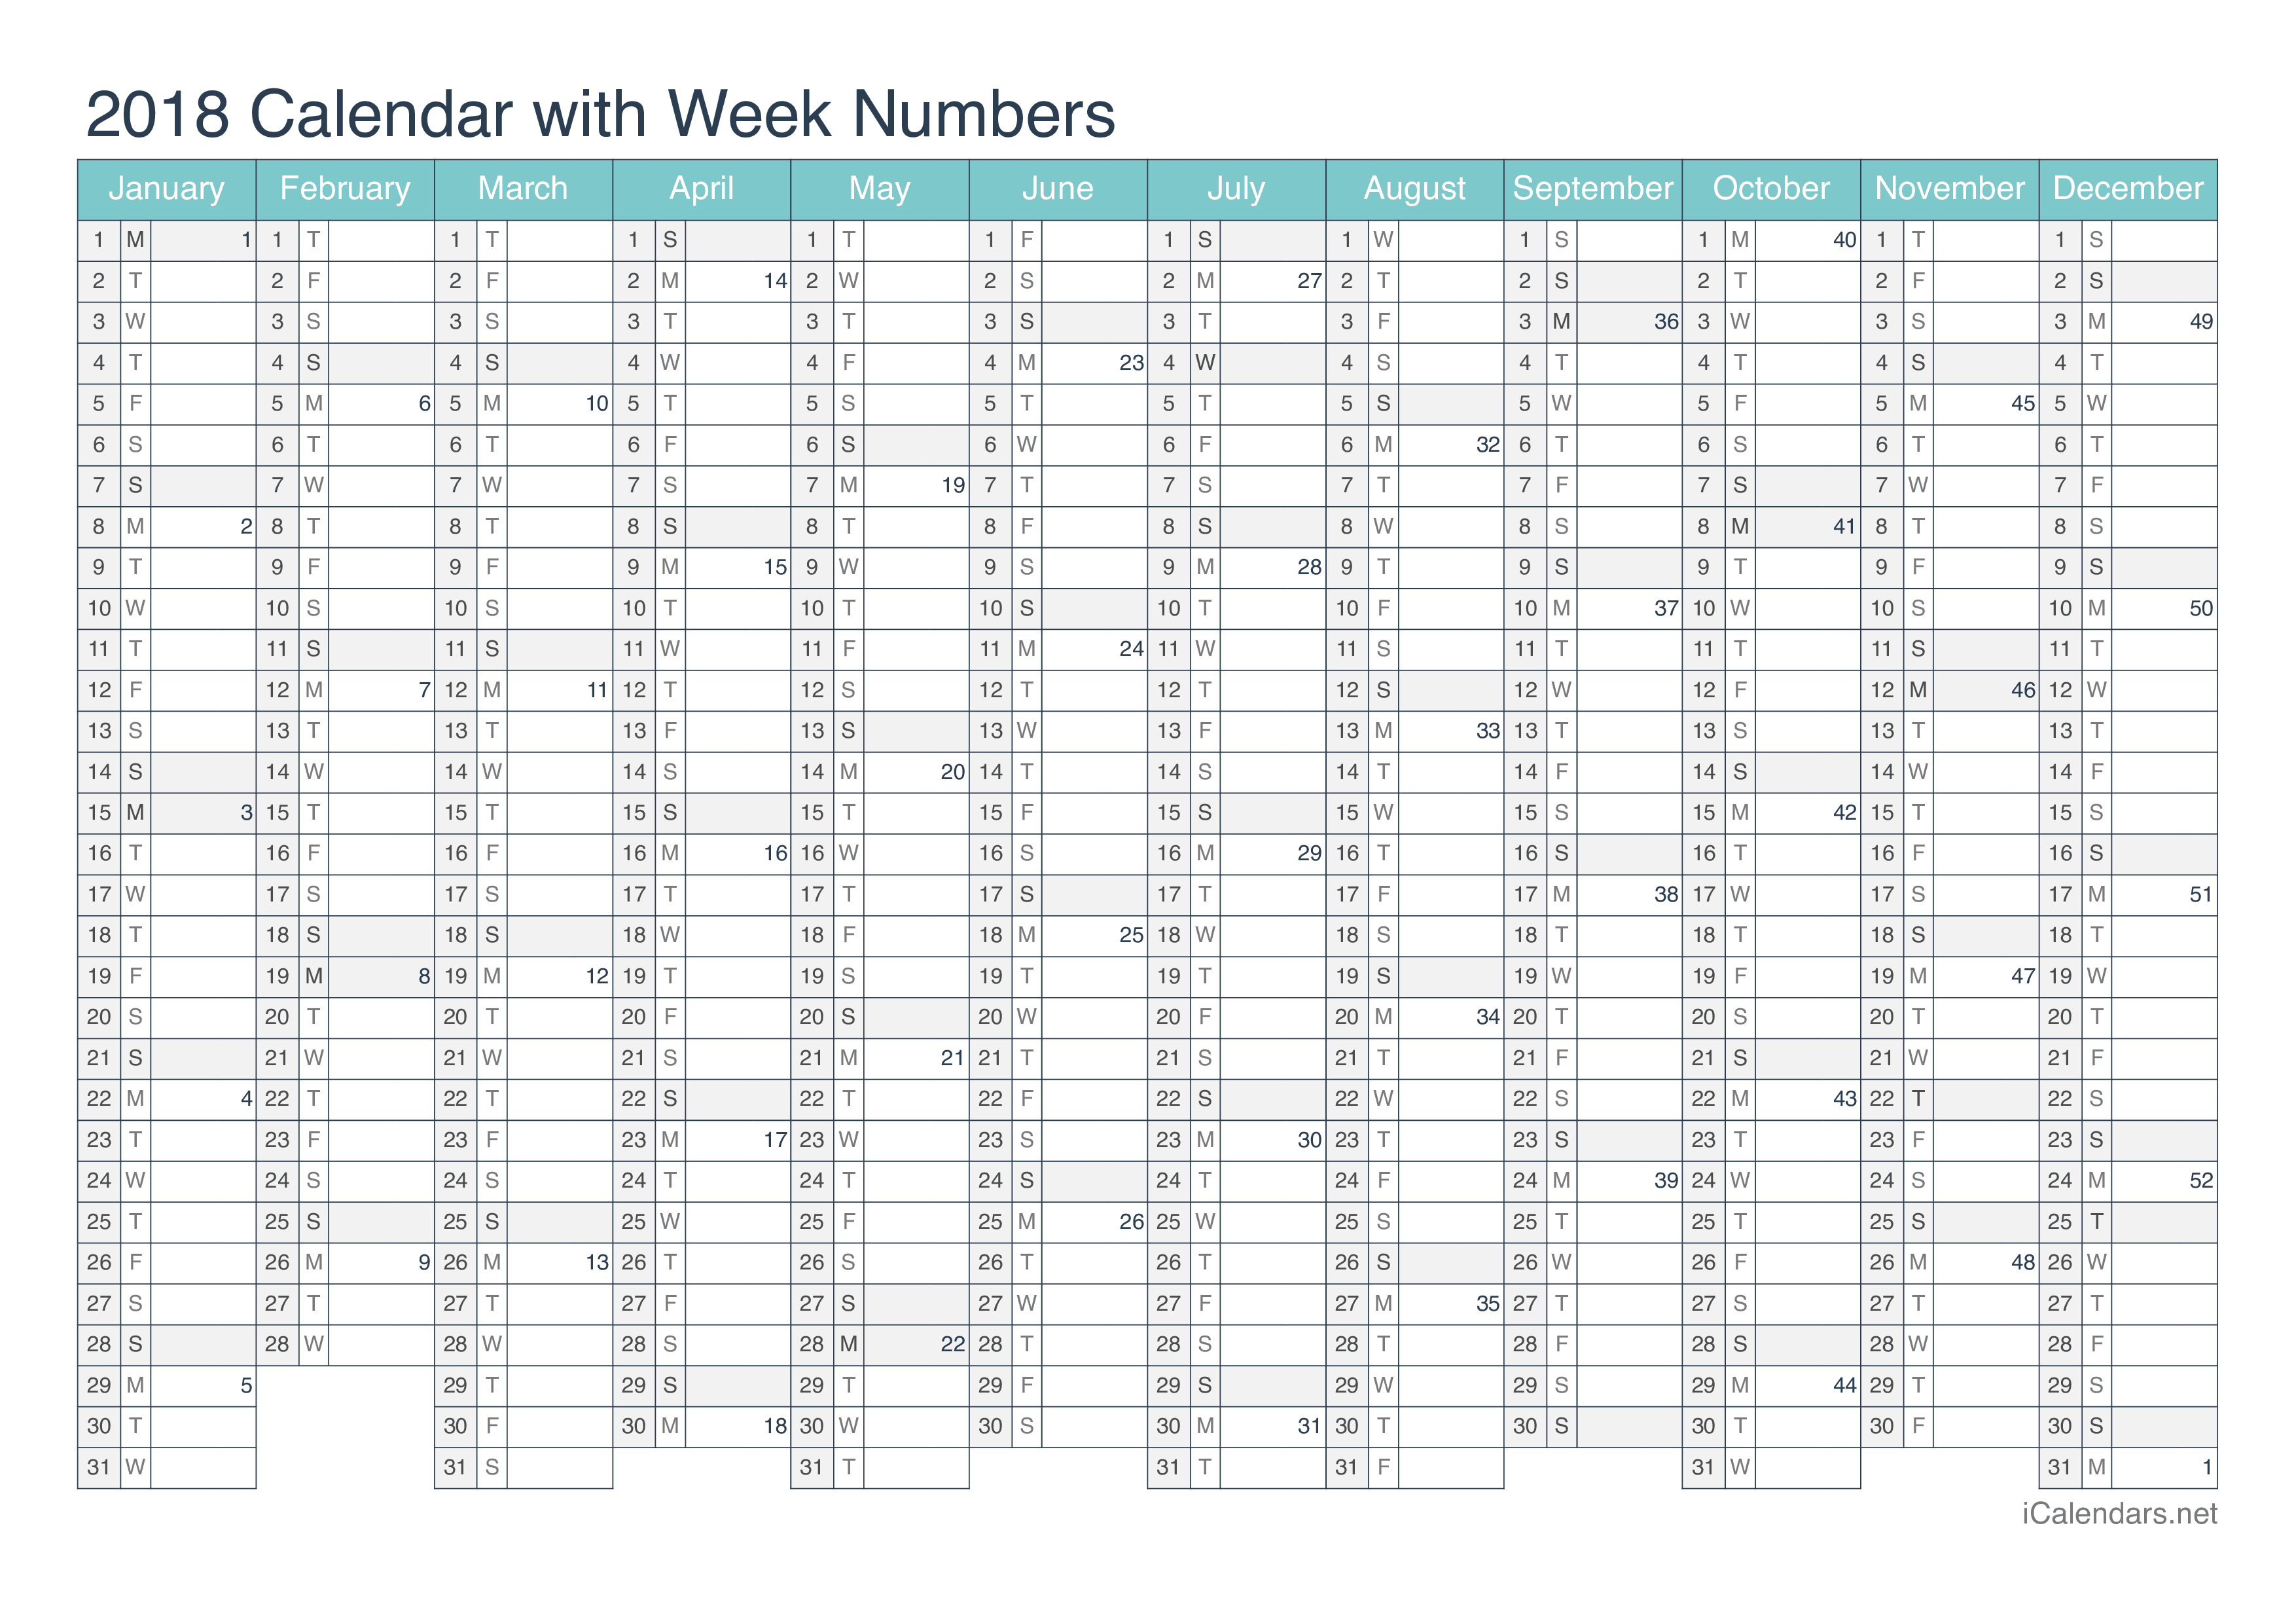 2018 Calendar with week numbers - Turquoise